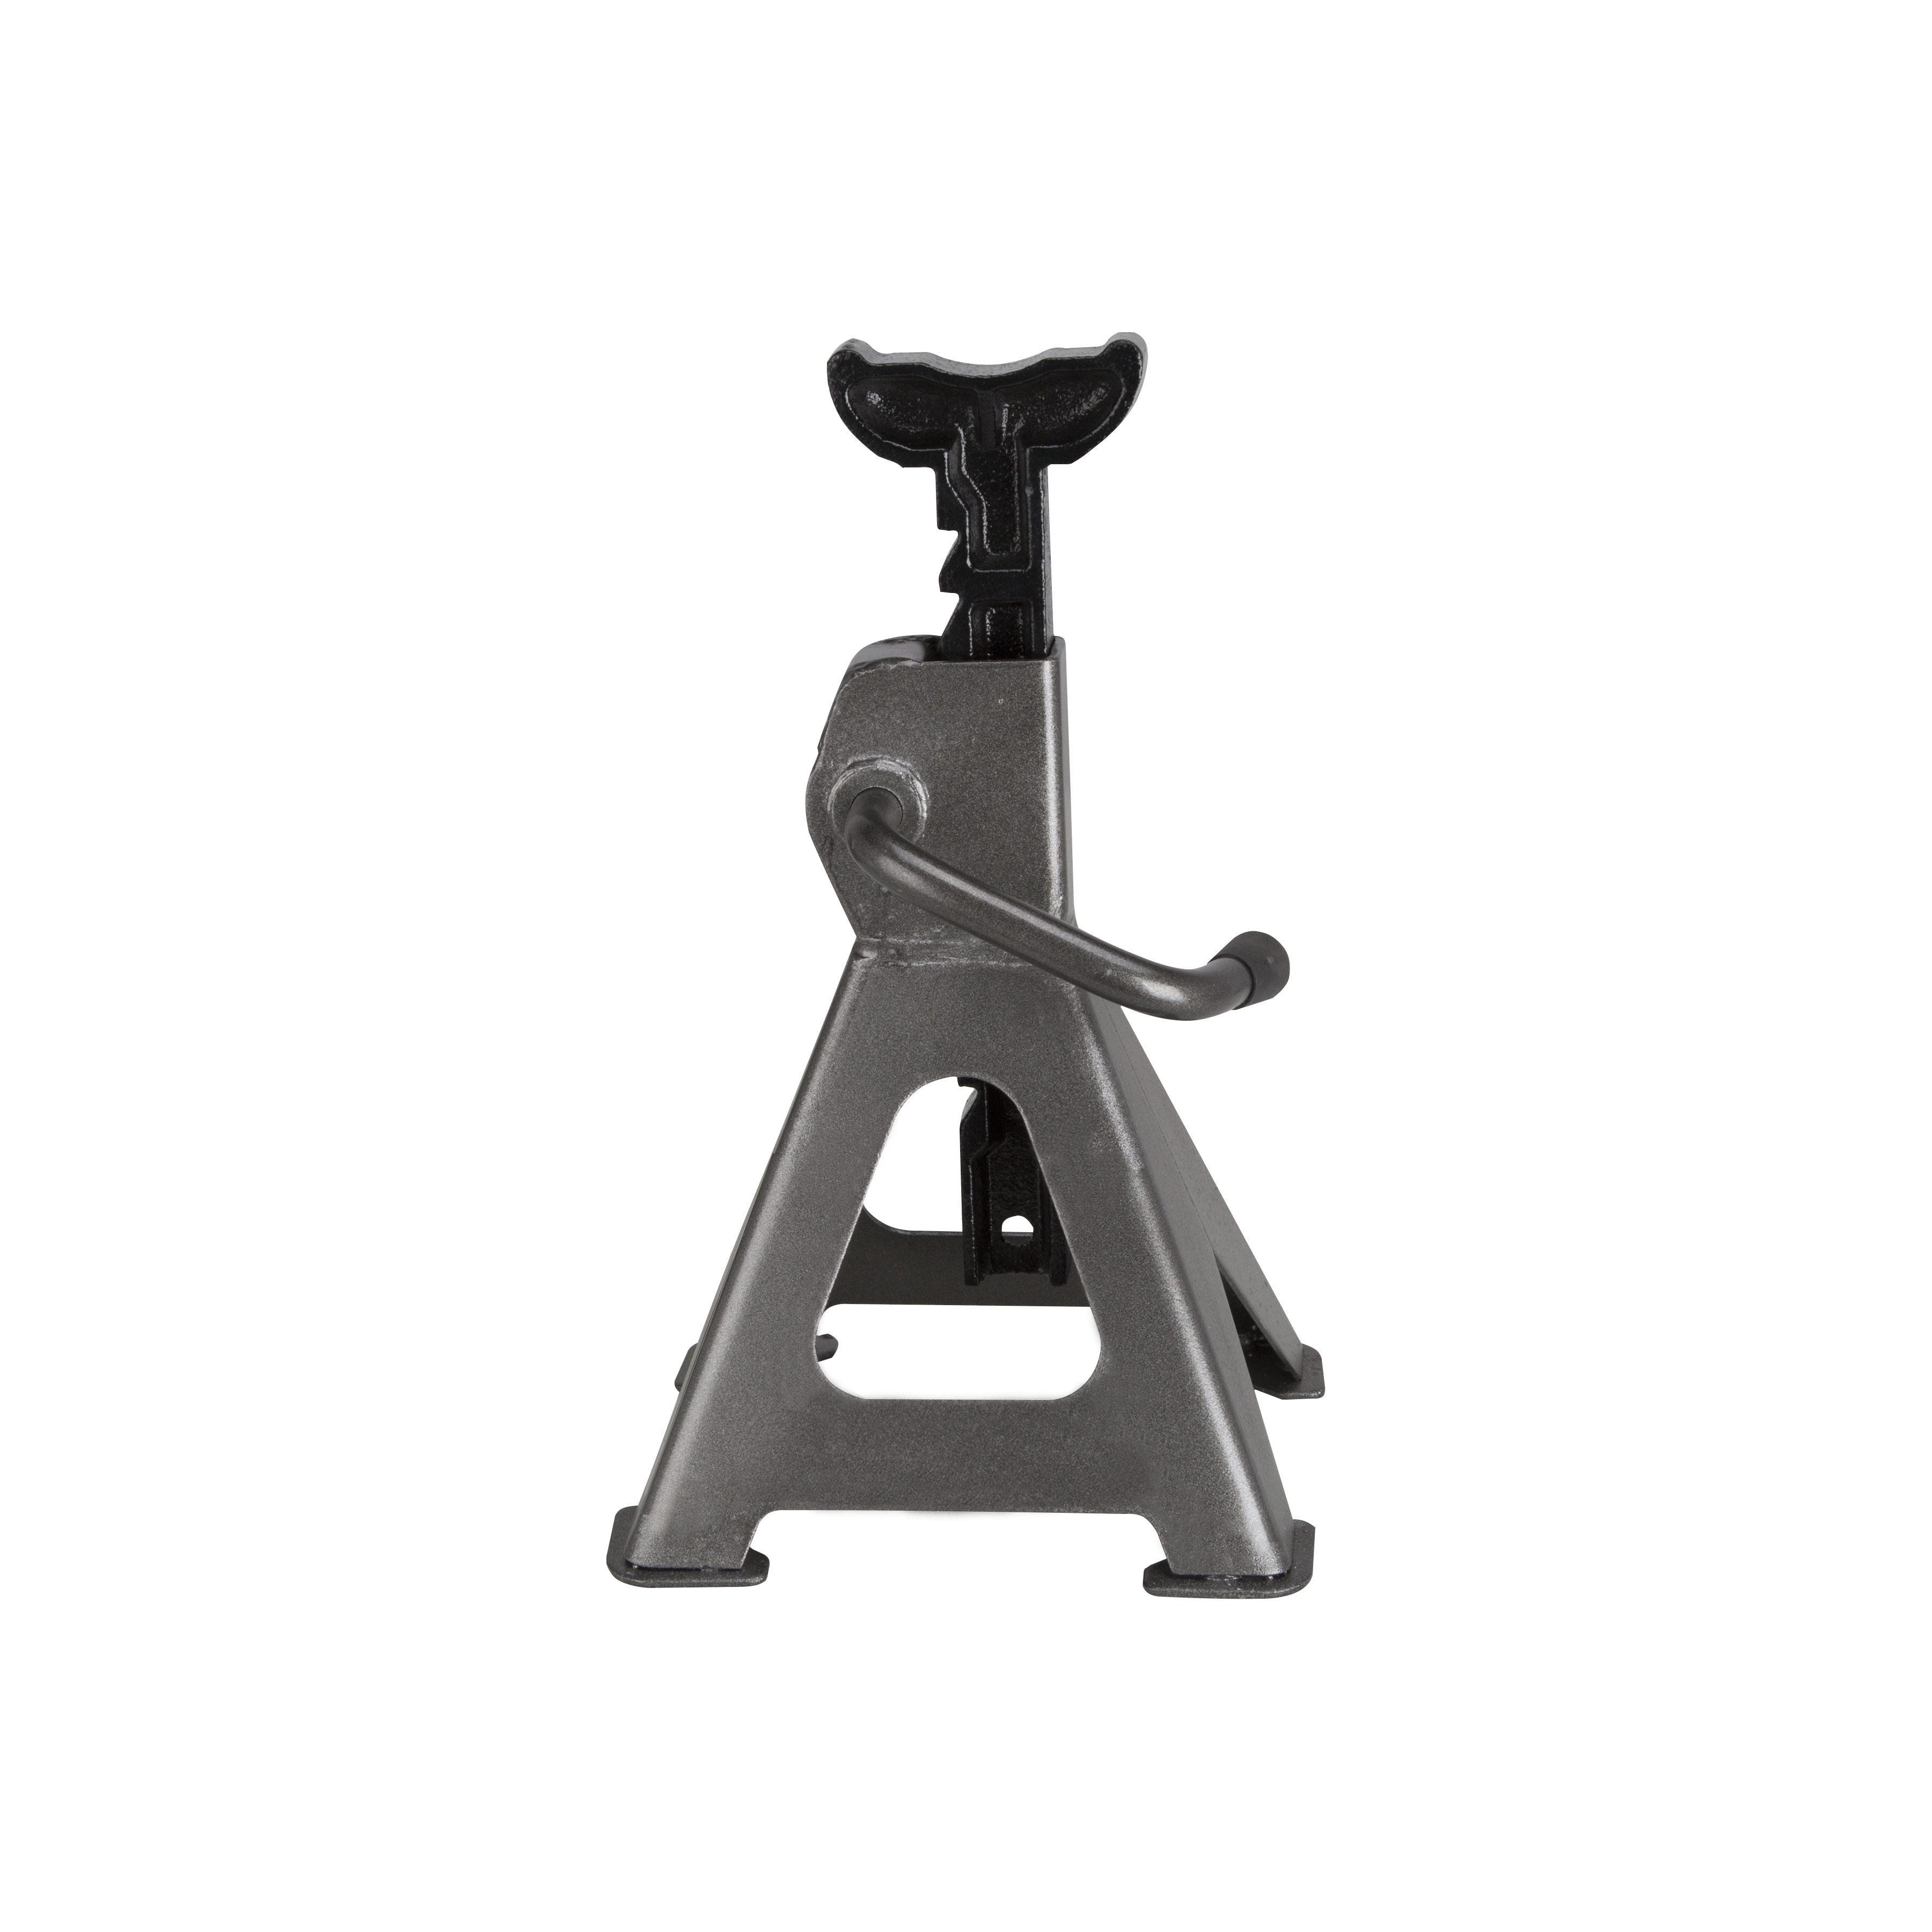 T210101 Jack Stand, 2 ton, 10-17/32 to 16-25/32 in Lift, Steel, Gray